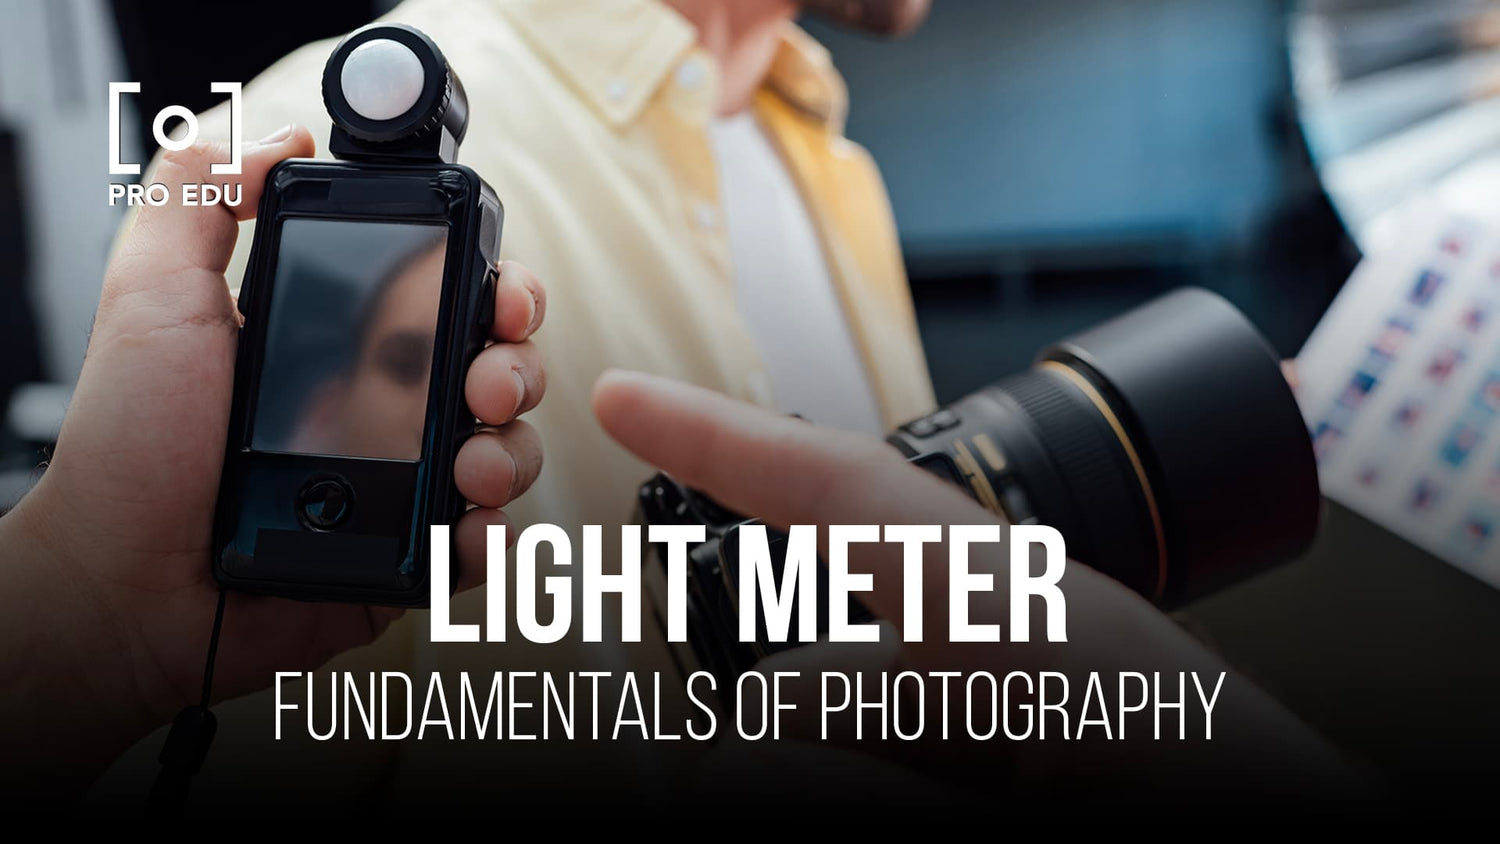 Achieving perfect exposure with light meter basics in photography